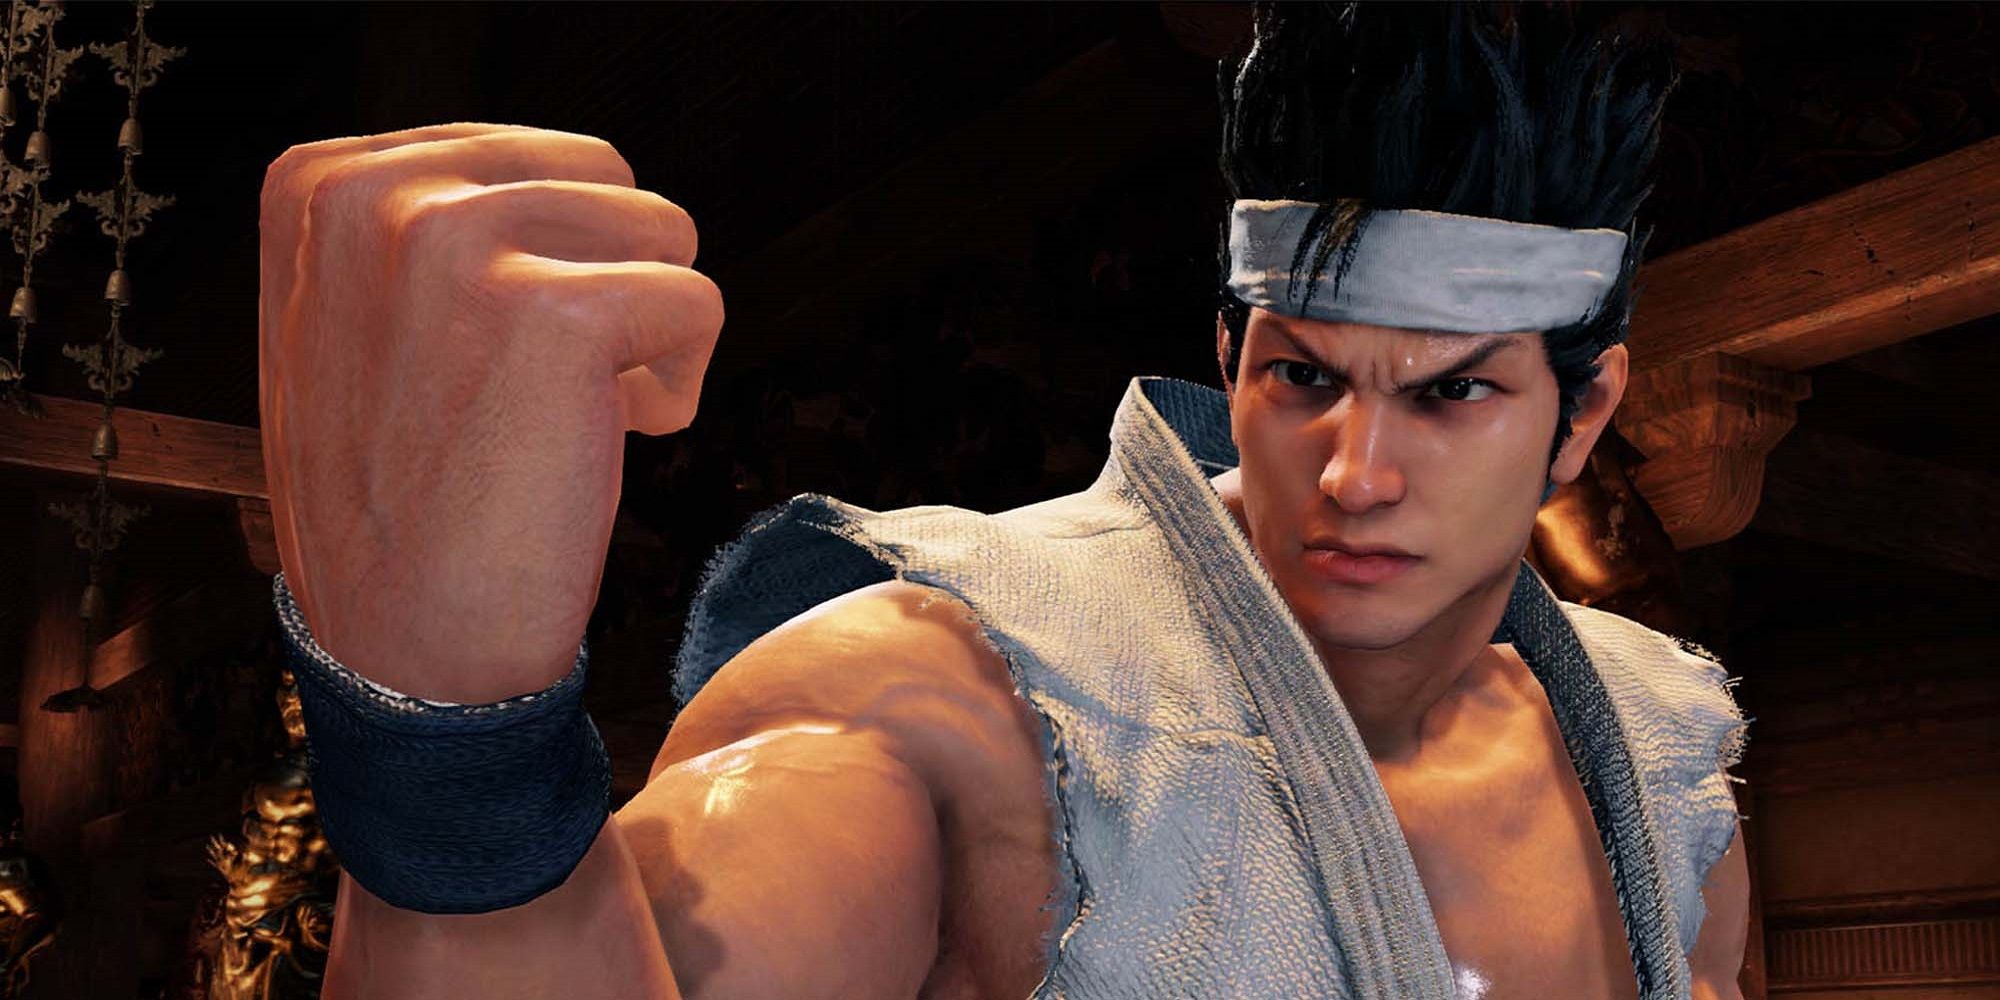 Street Fighter 6 fans are thirsting for Ryu